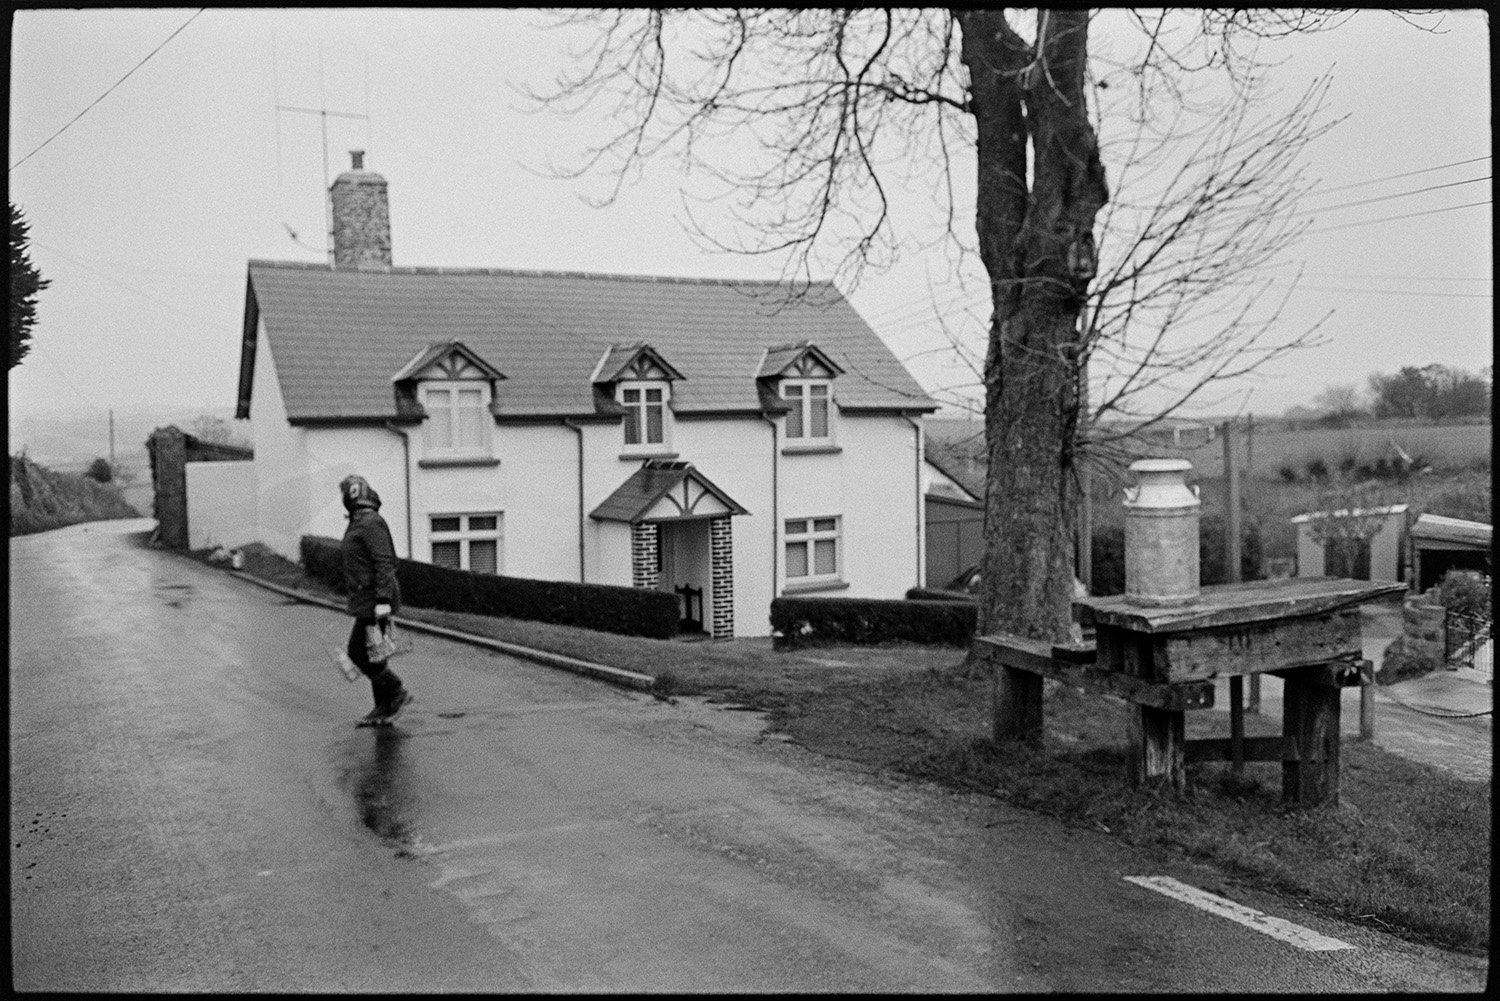 Woman delivering milk round village. <br />
[Jane Woolacott crossing a road by a house and carrying two holders containing milk bottles, on her rounds delivering milk in Atherington. A milk church is on a wooden stand under a tree in the foreground.]